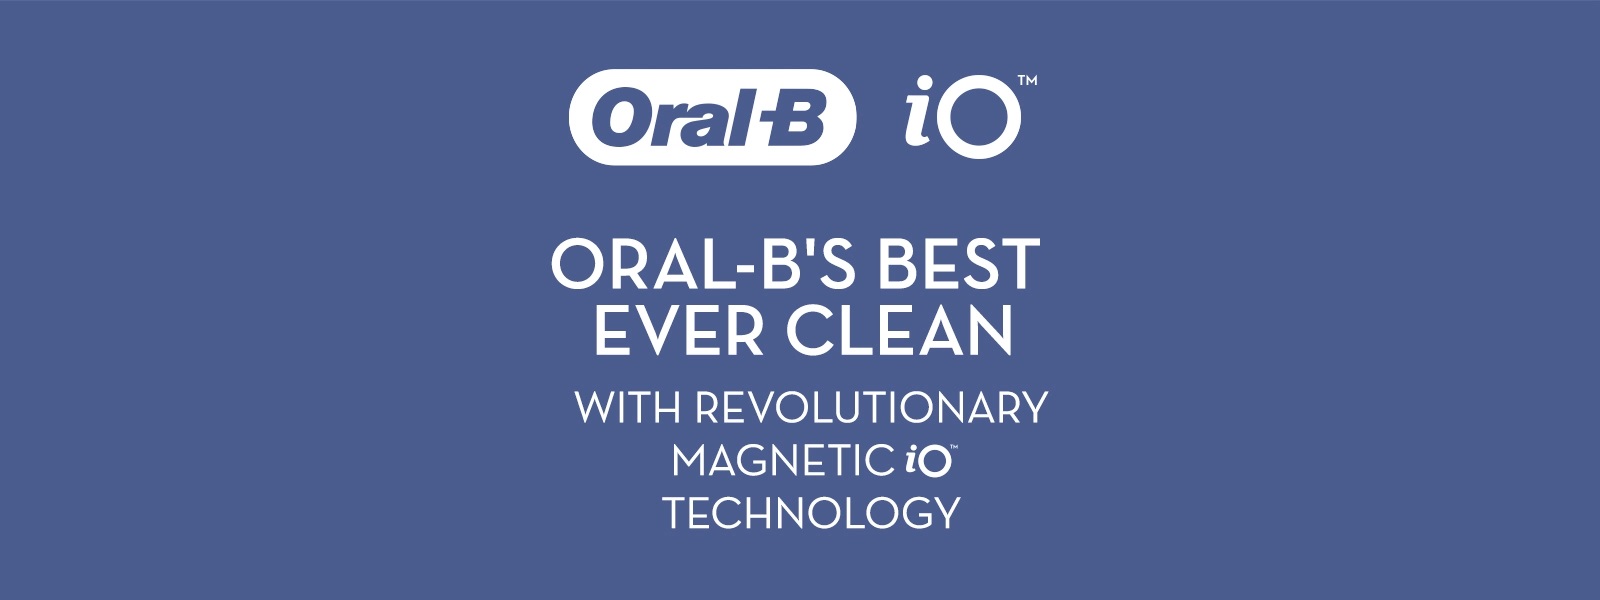 Oral-B iO. Oral-B's best ever clean with revolutionary magnetic iO technology